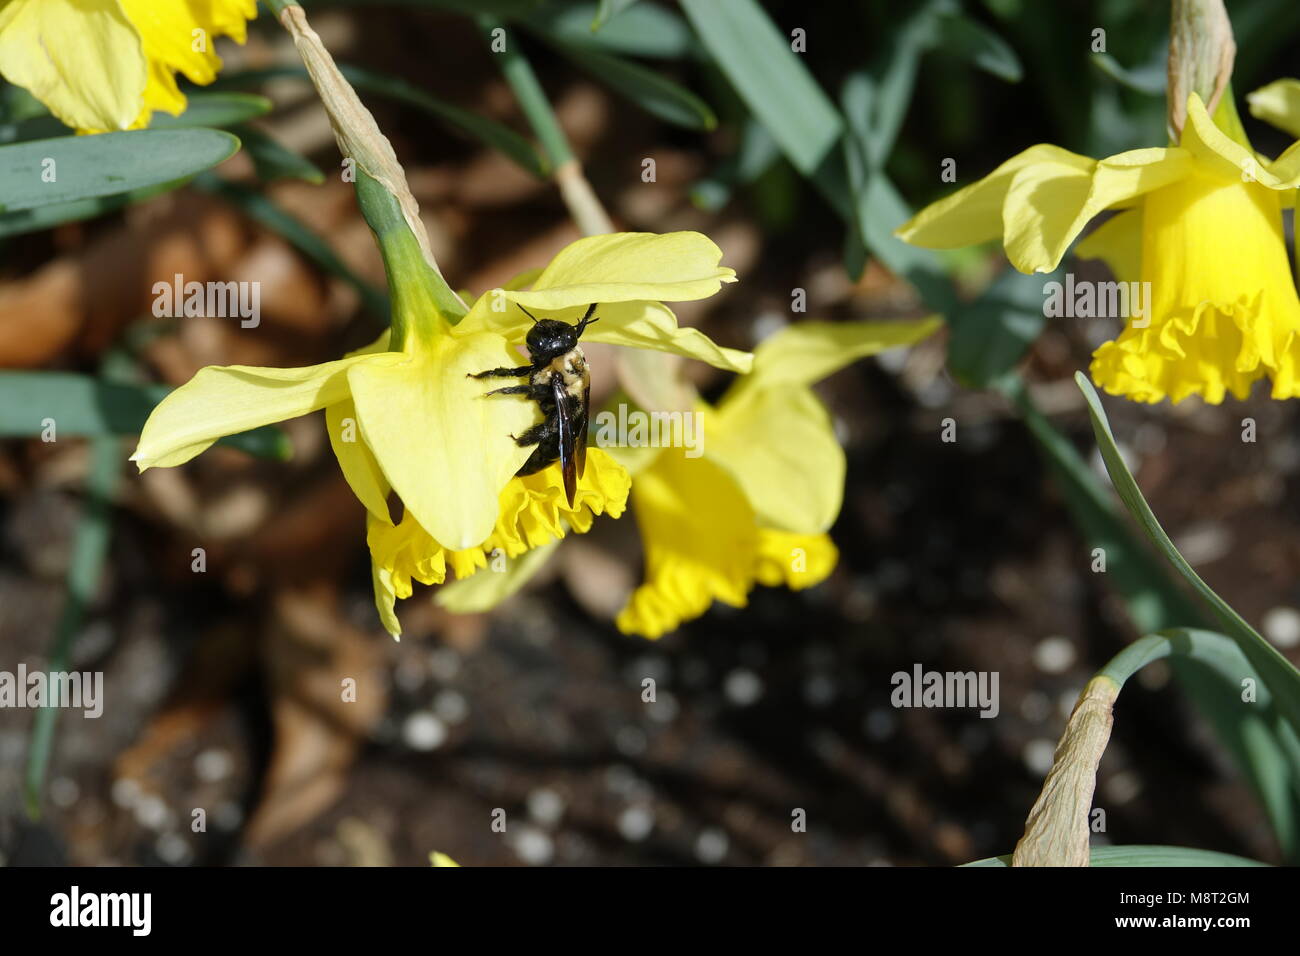 Easter Lilies or Daffodils are a beautiful spring flower are symbol of the resurrection of Jesus Christ. Stock Photo